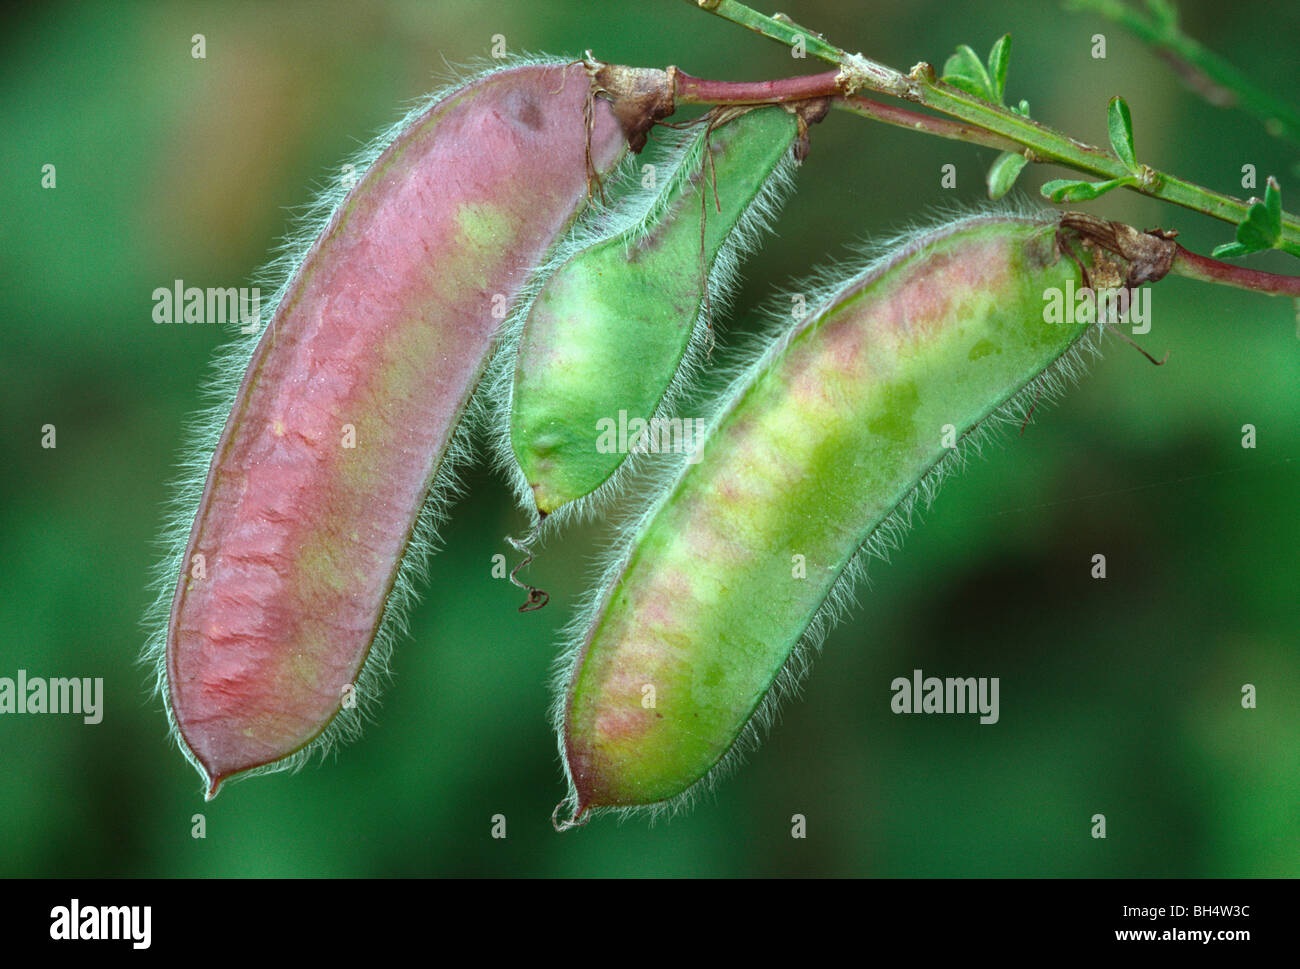 Close up of the young developing seed pods of broom (Cytisus scoparius) growing on a Dorset heath. Stock Photo